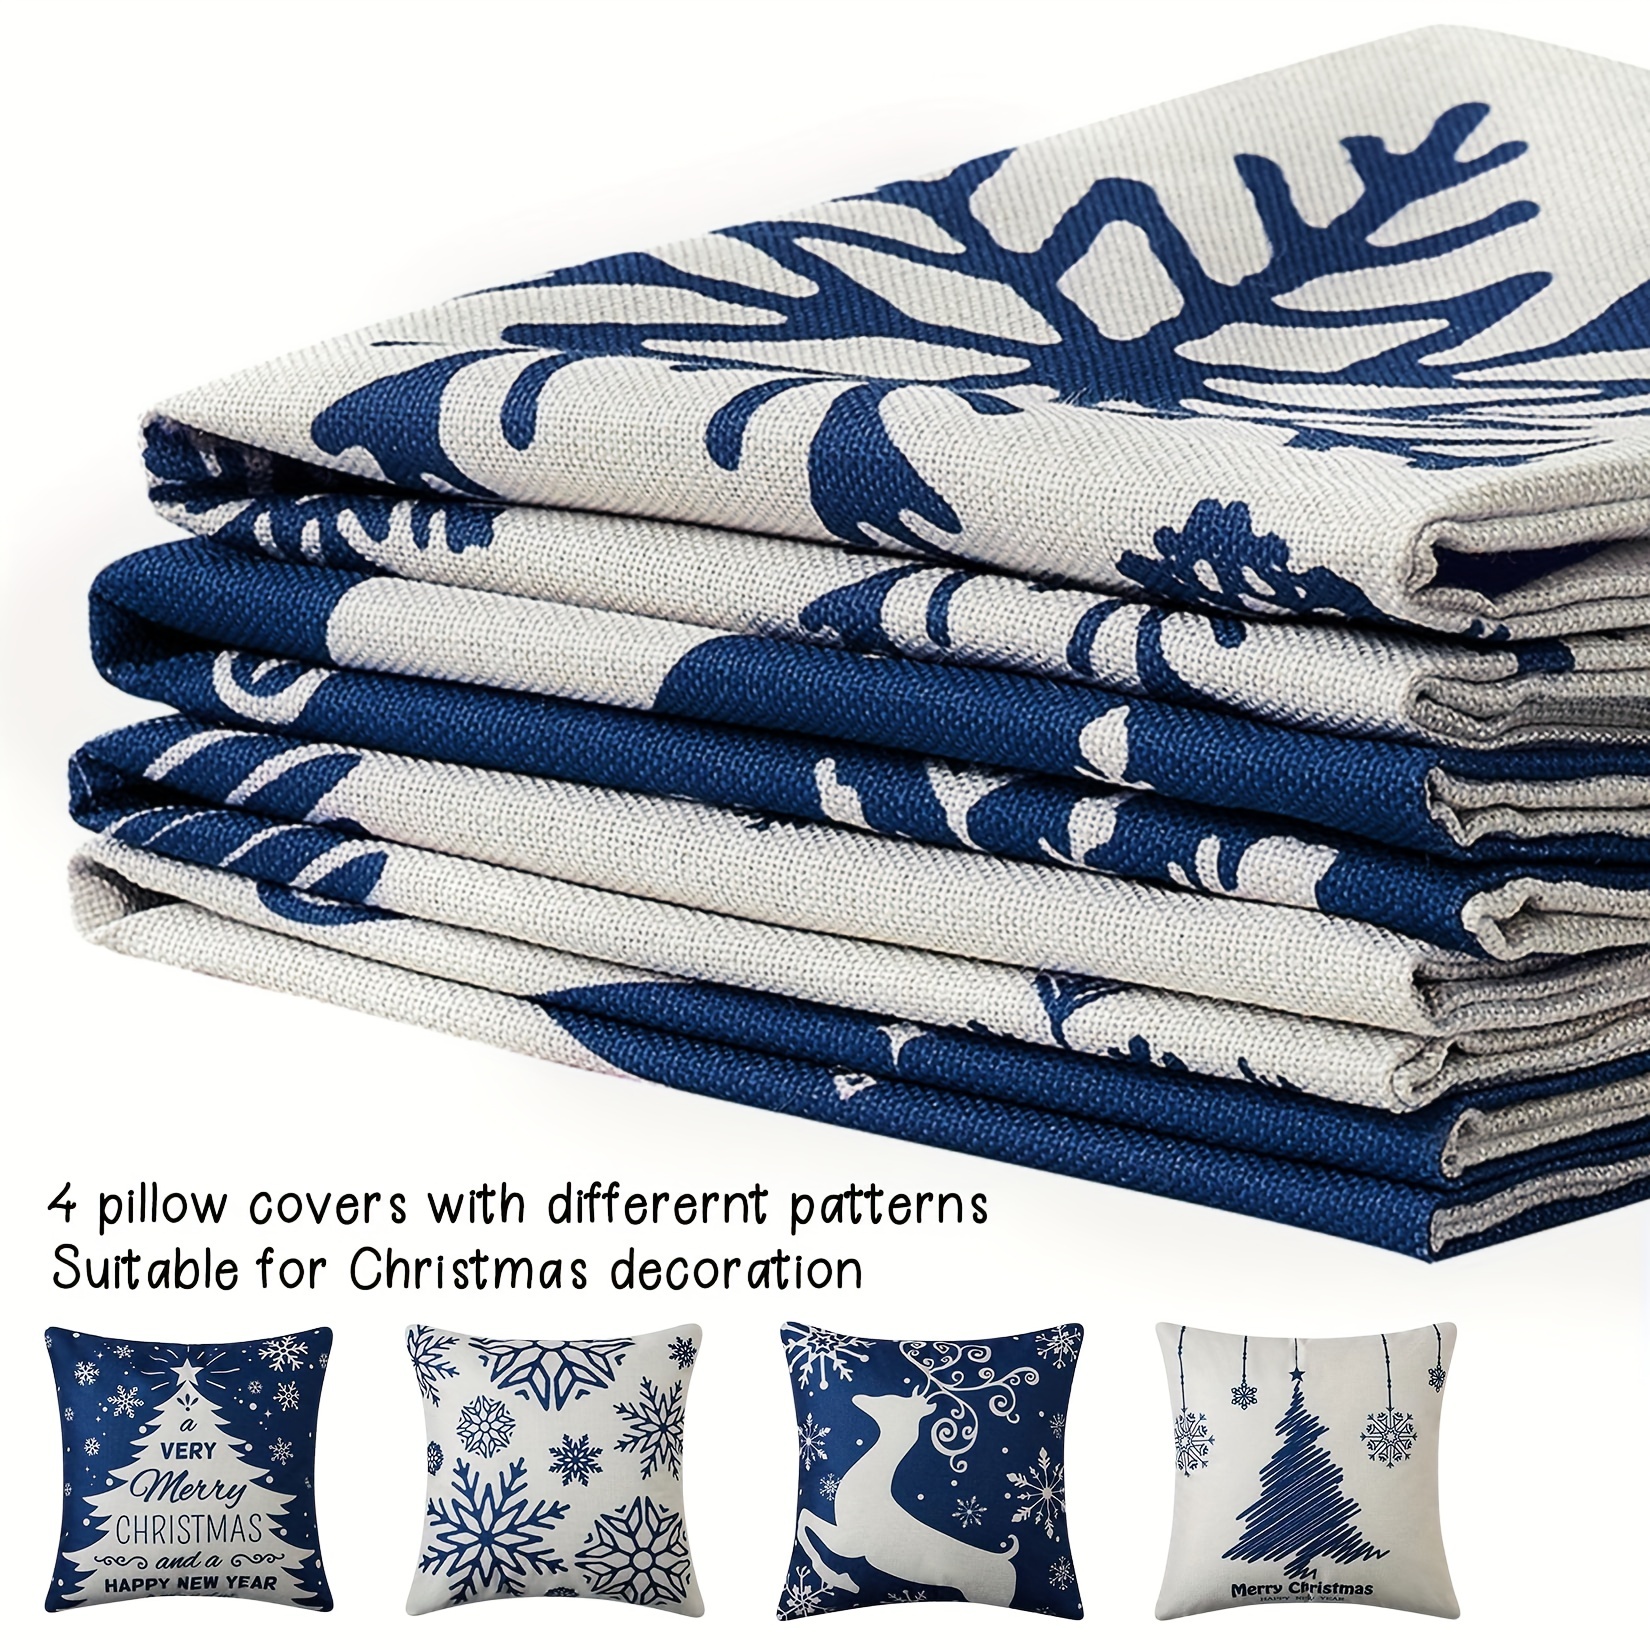 Enlightened 4pcs Blue Christmas Linen Hockey Pillow Set Explosion Models  for Living Room Bedroom Sofa Cushion Pillow Covers New Year Gifts 